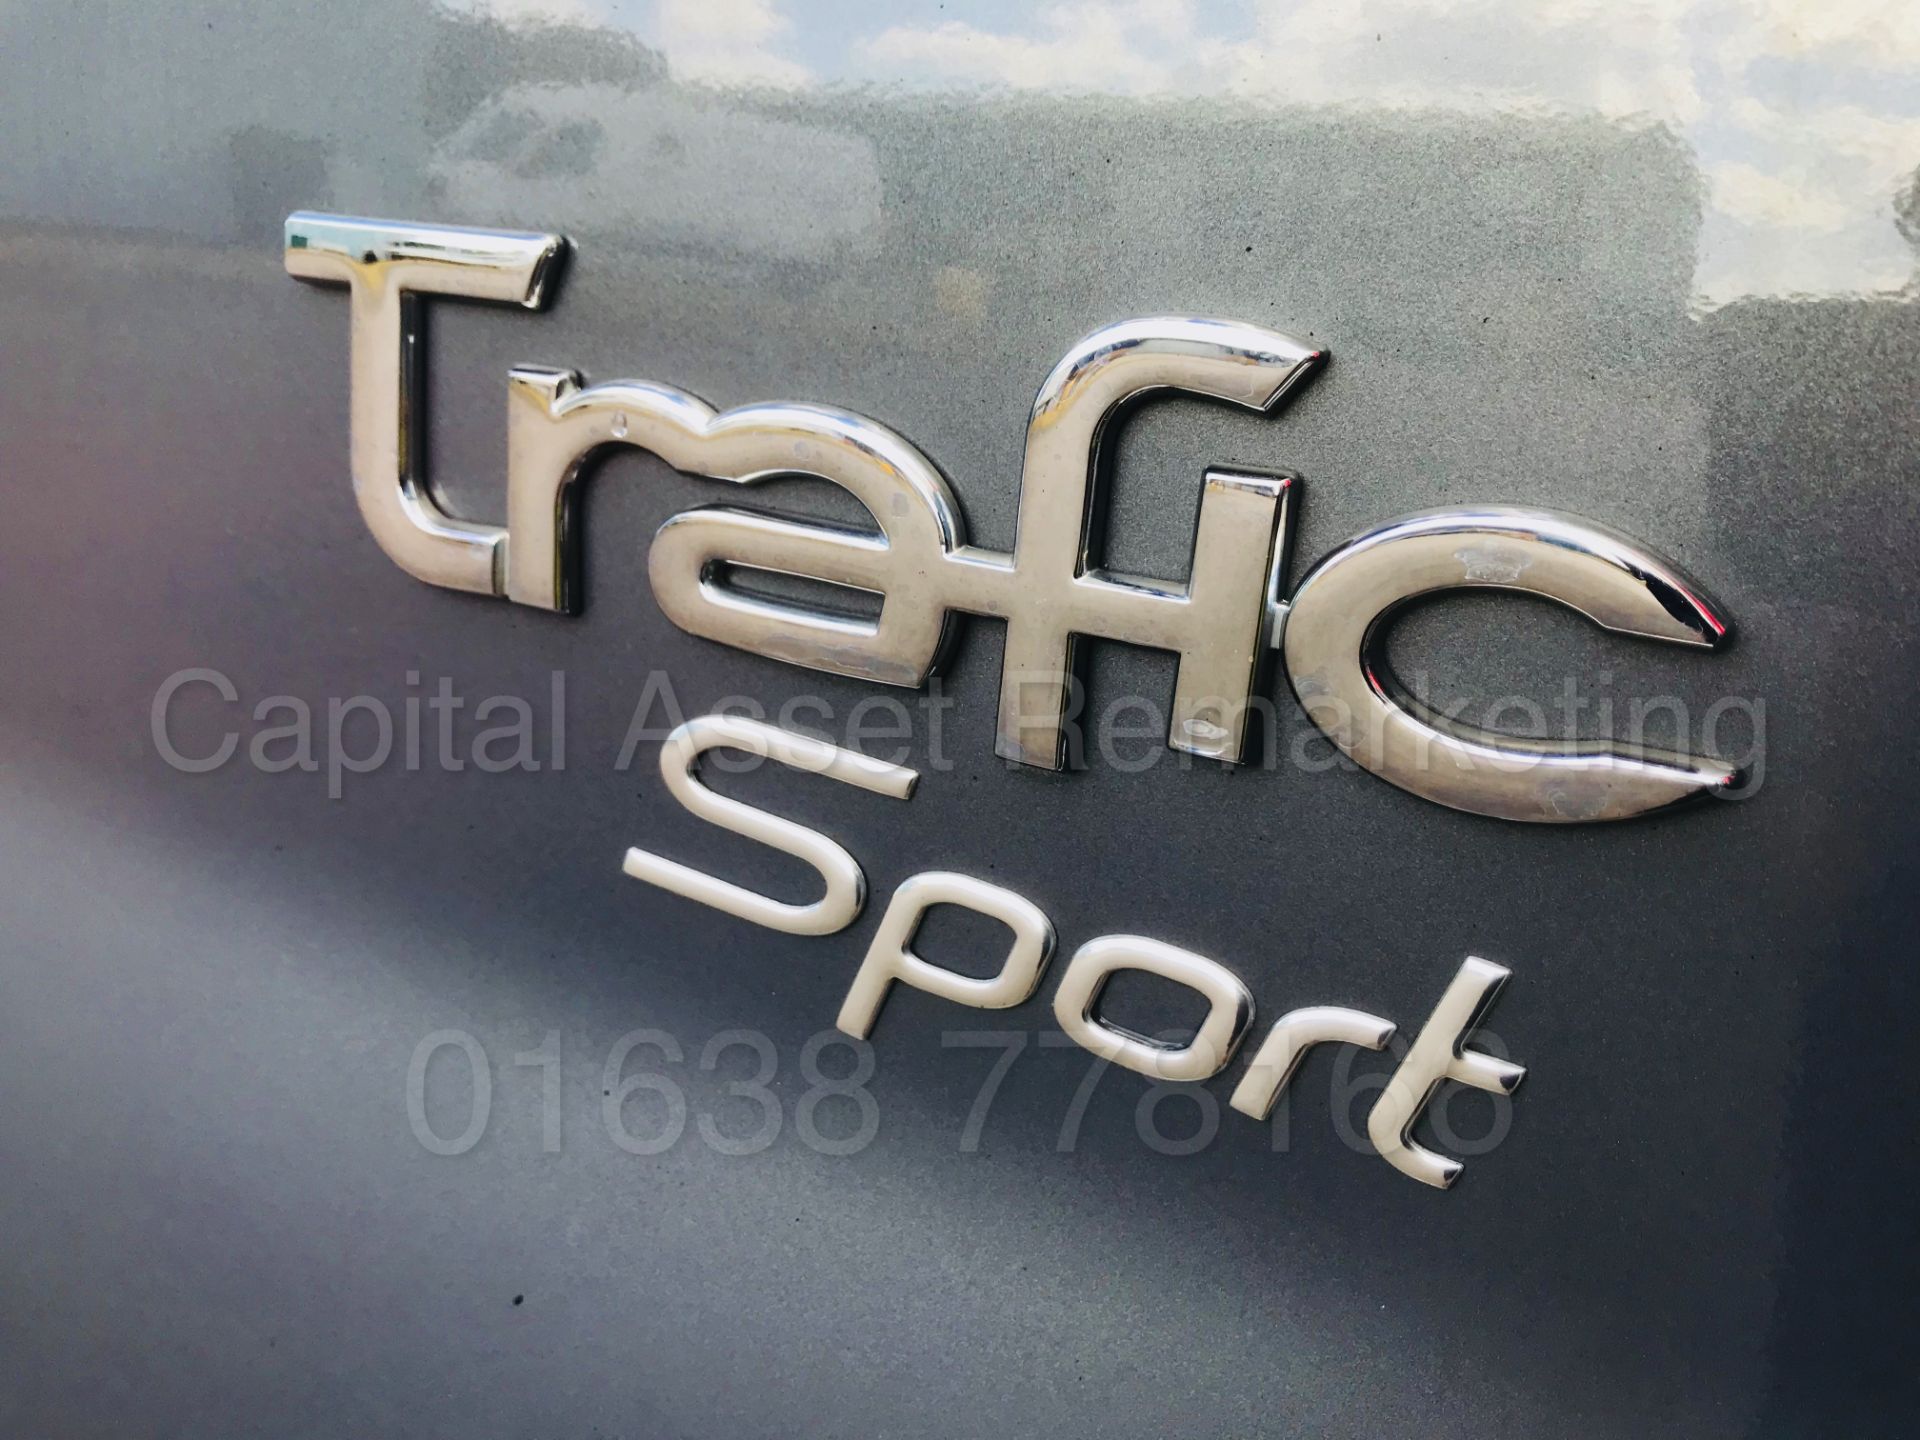 (On Sale) RENAULT TRAFIC 'SPORT EDITION' LWB (2014) '2.0 DCI - 115 BHP - 6 SPEED' *AIR CON* (NO VAT) - Image 15 of 40